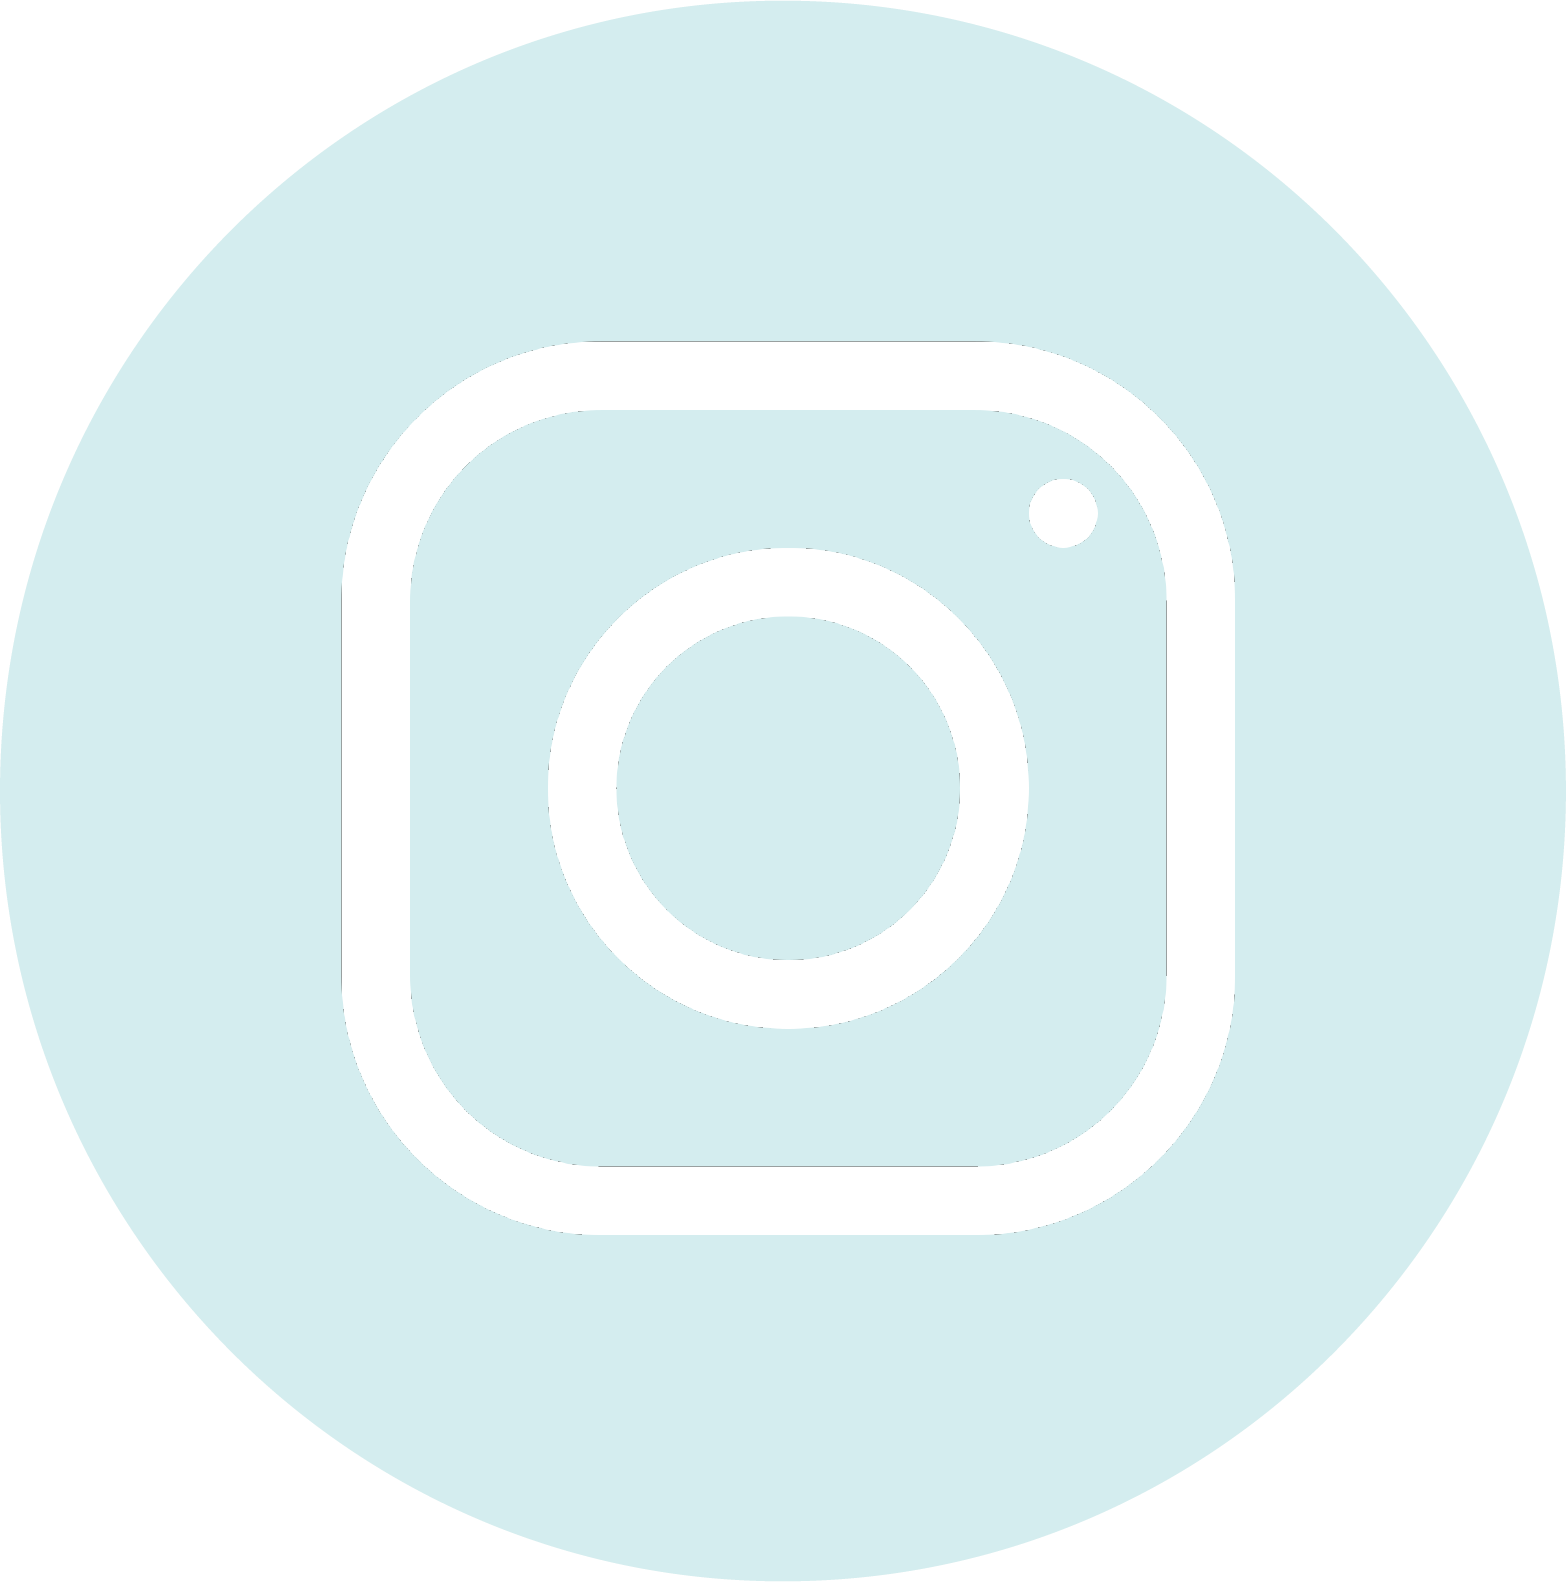 Insta Icon Aesthetic Blue Download 11 Free Aesthetic Apps Icons In Ios Windows Material And Other Design Styles